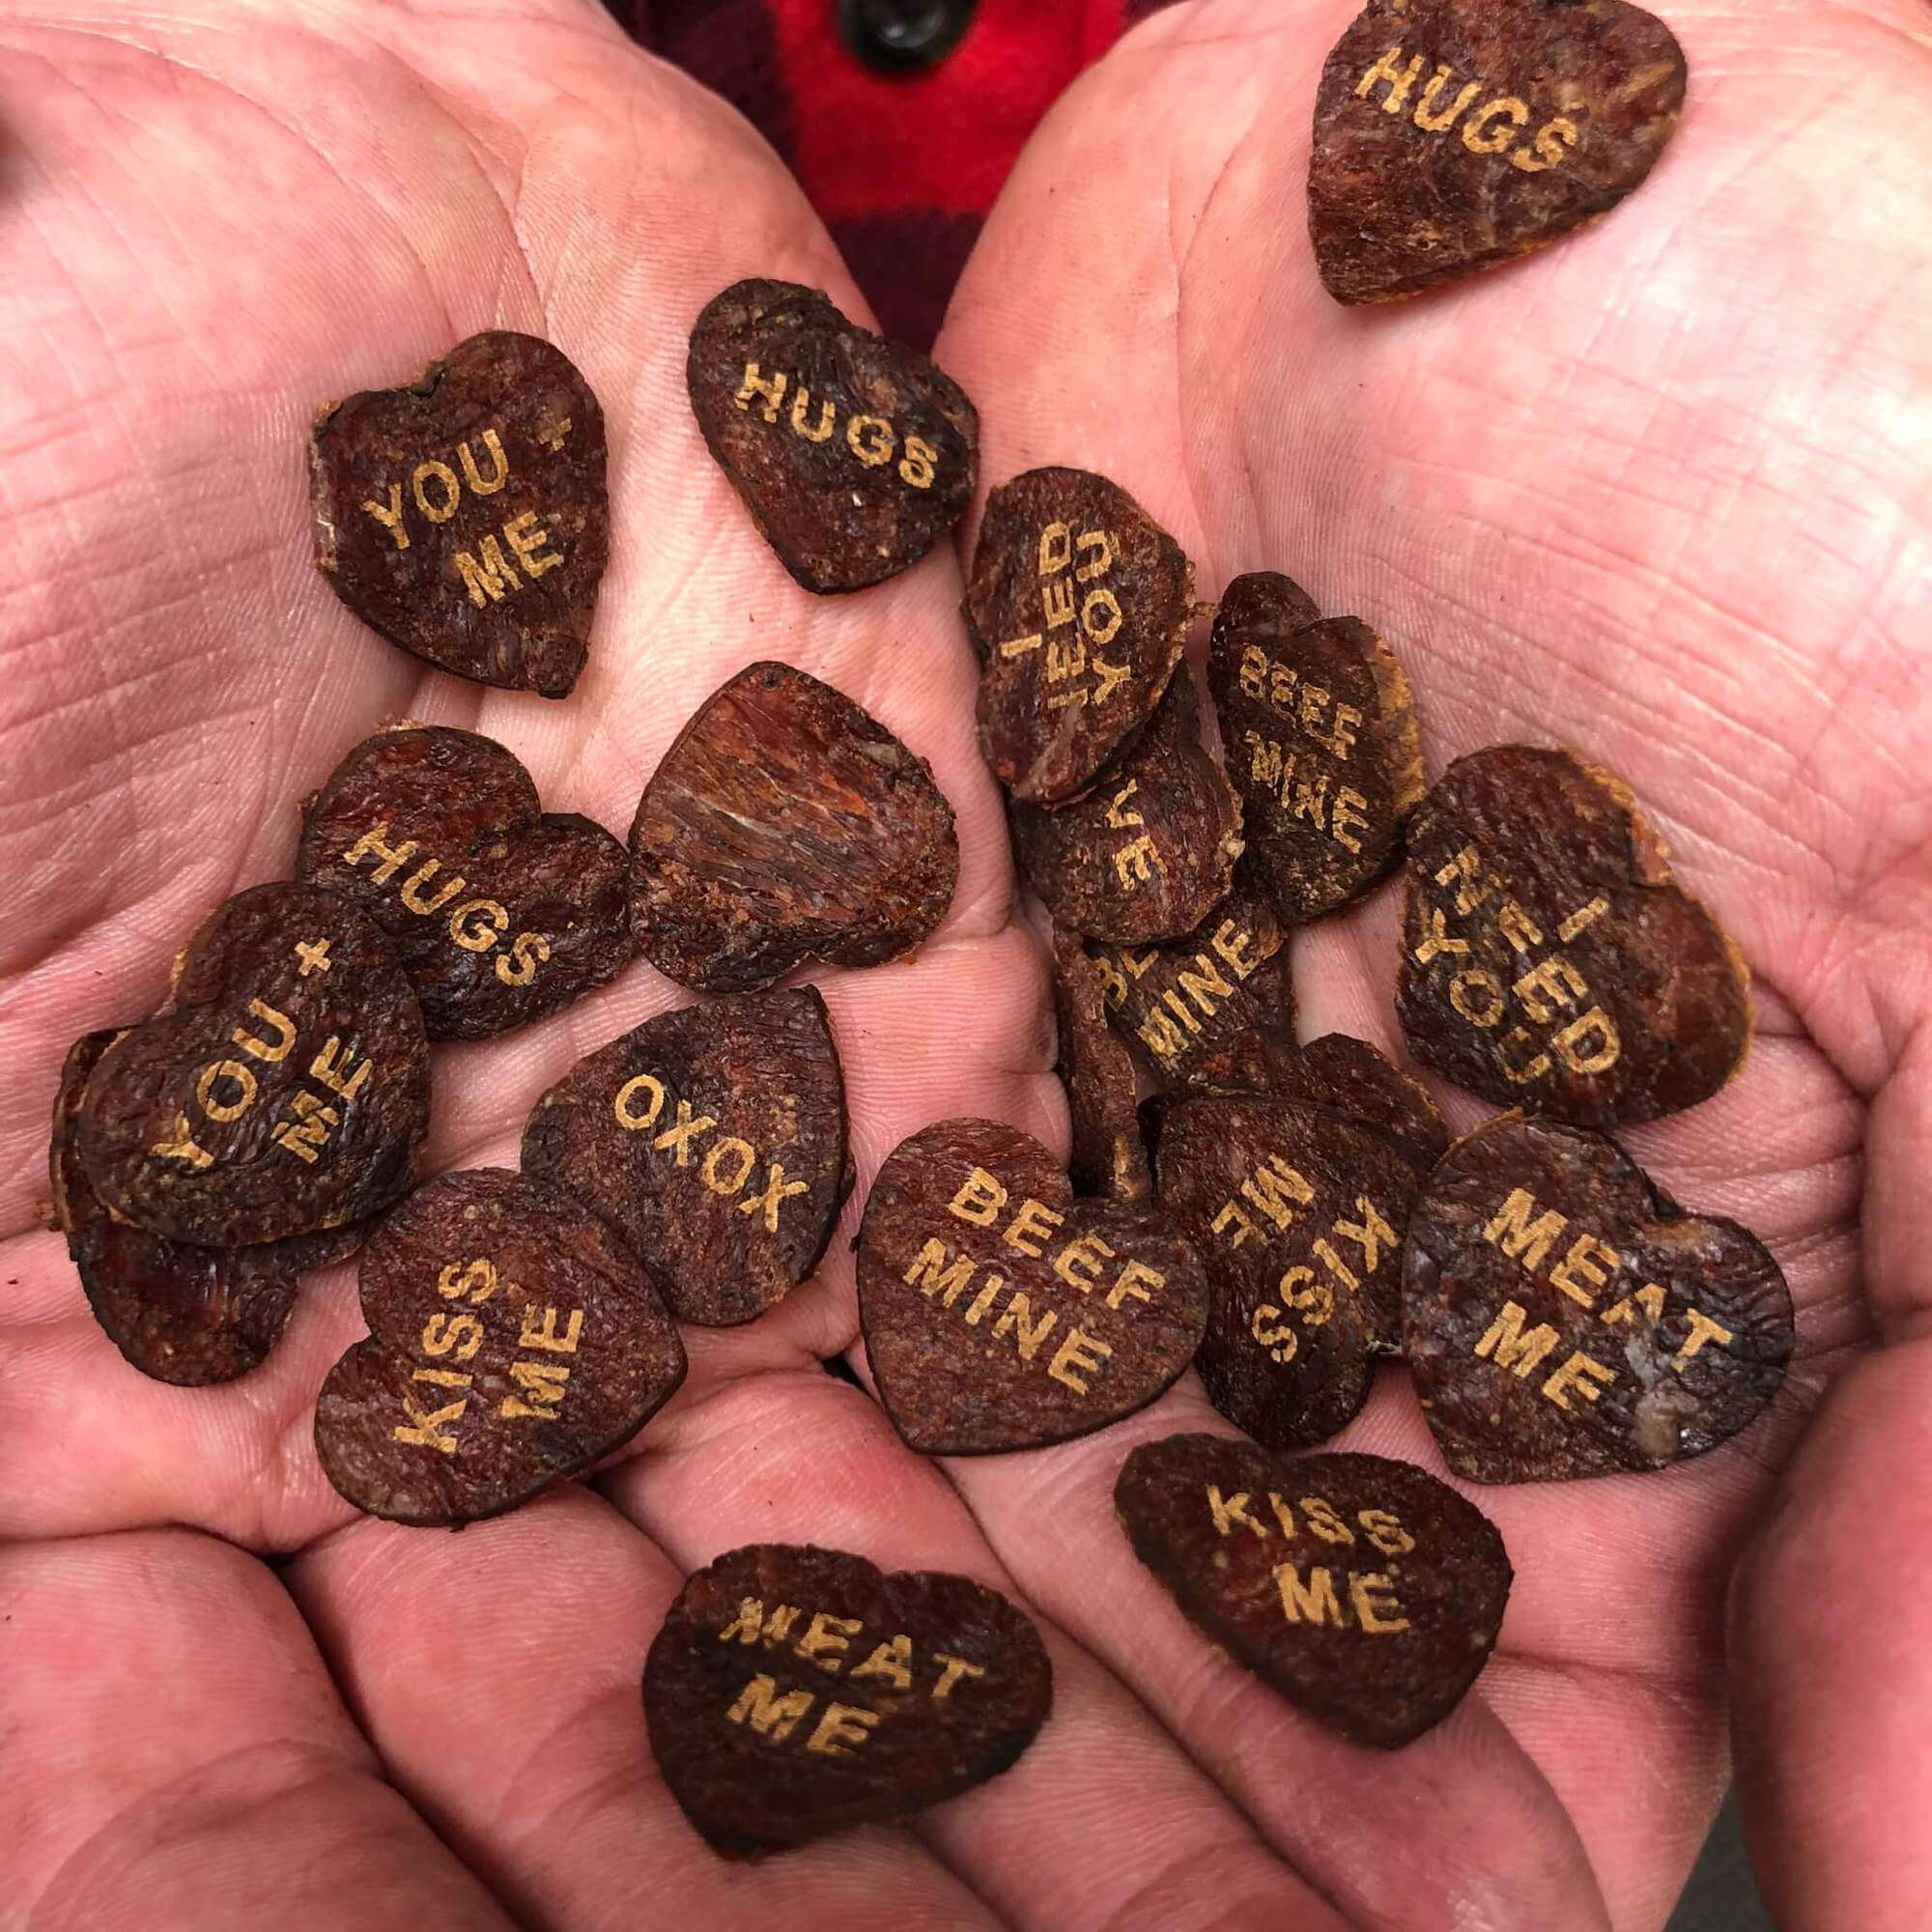 Over one dozen mini beef jerky hearts being held in the palms of two hands